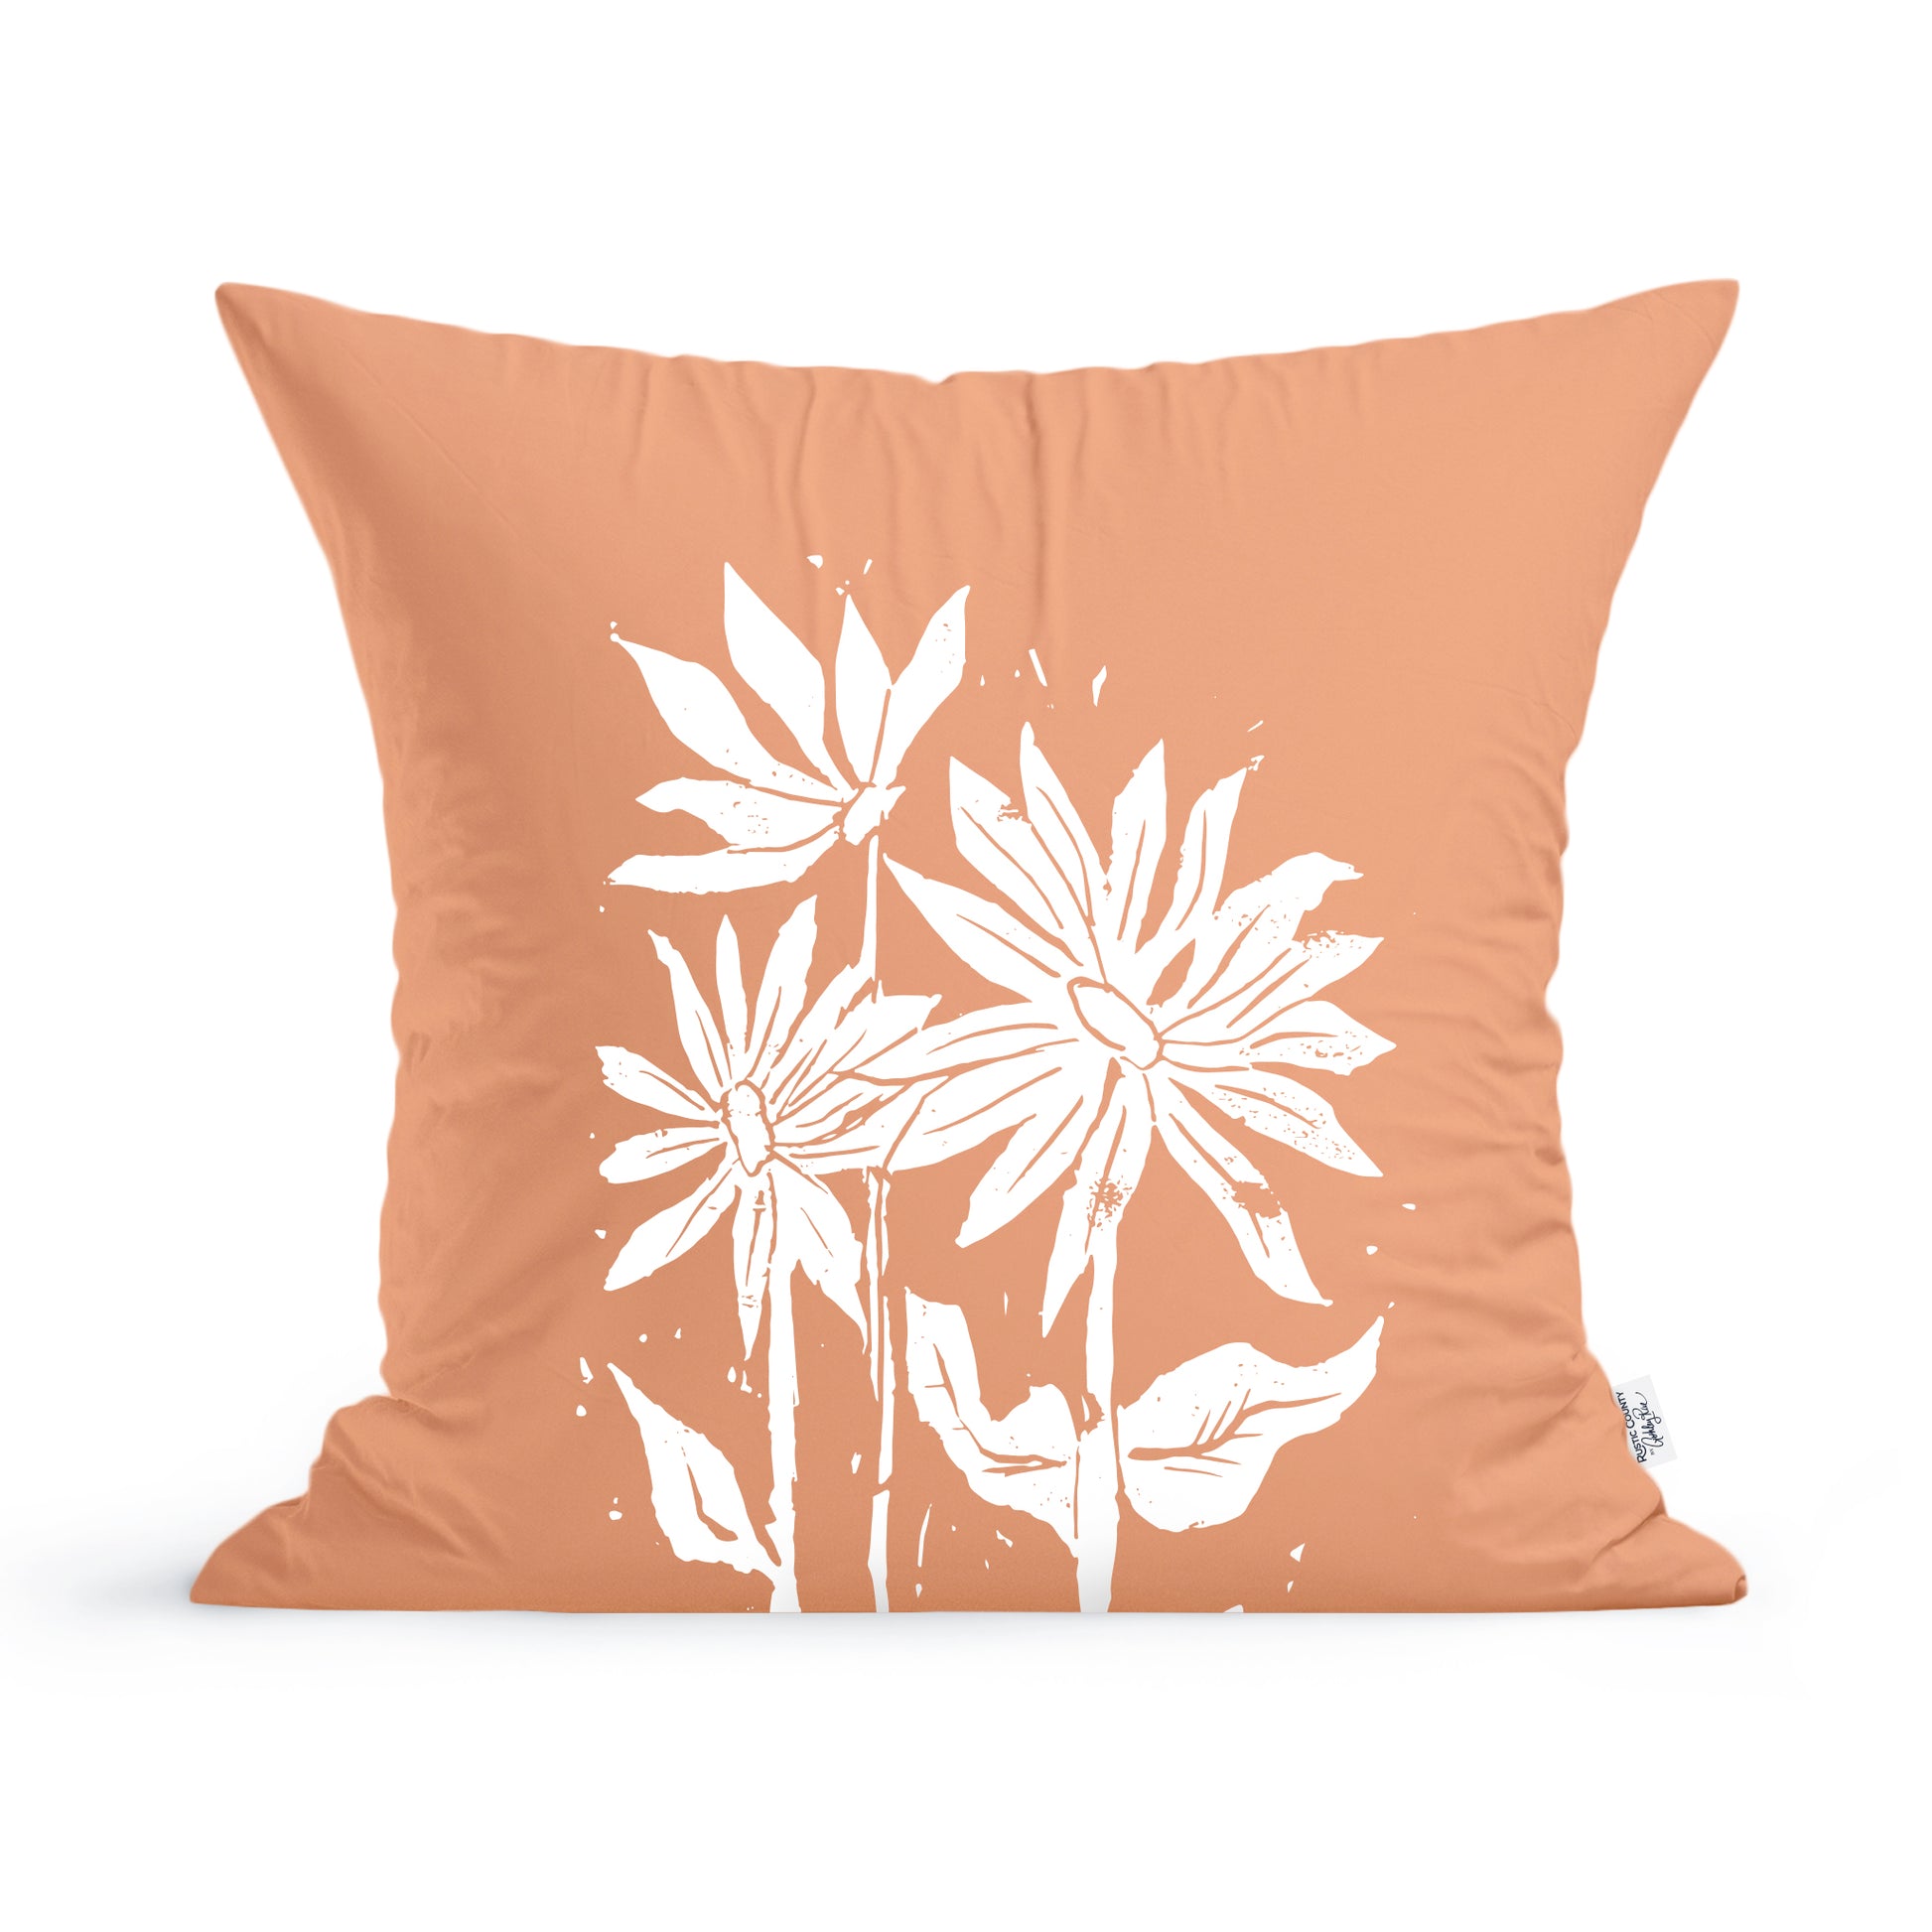 Decorative Sunflowers Pillow with a peach background featuring a white sunflower print design by Rustic County.